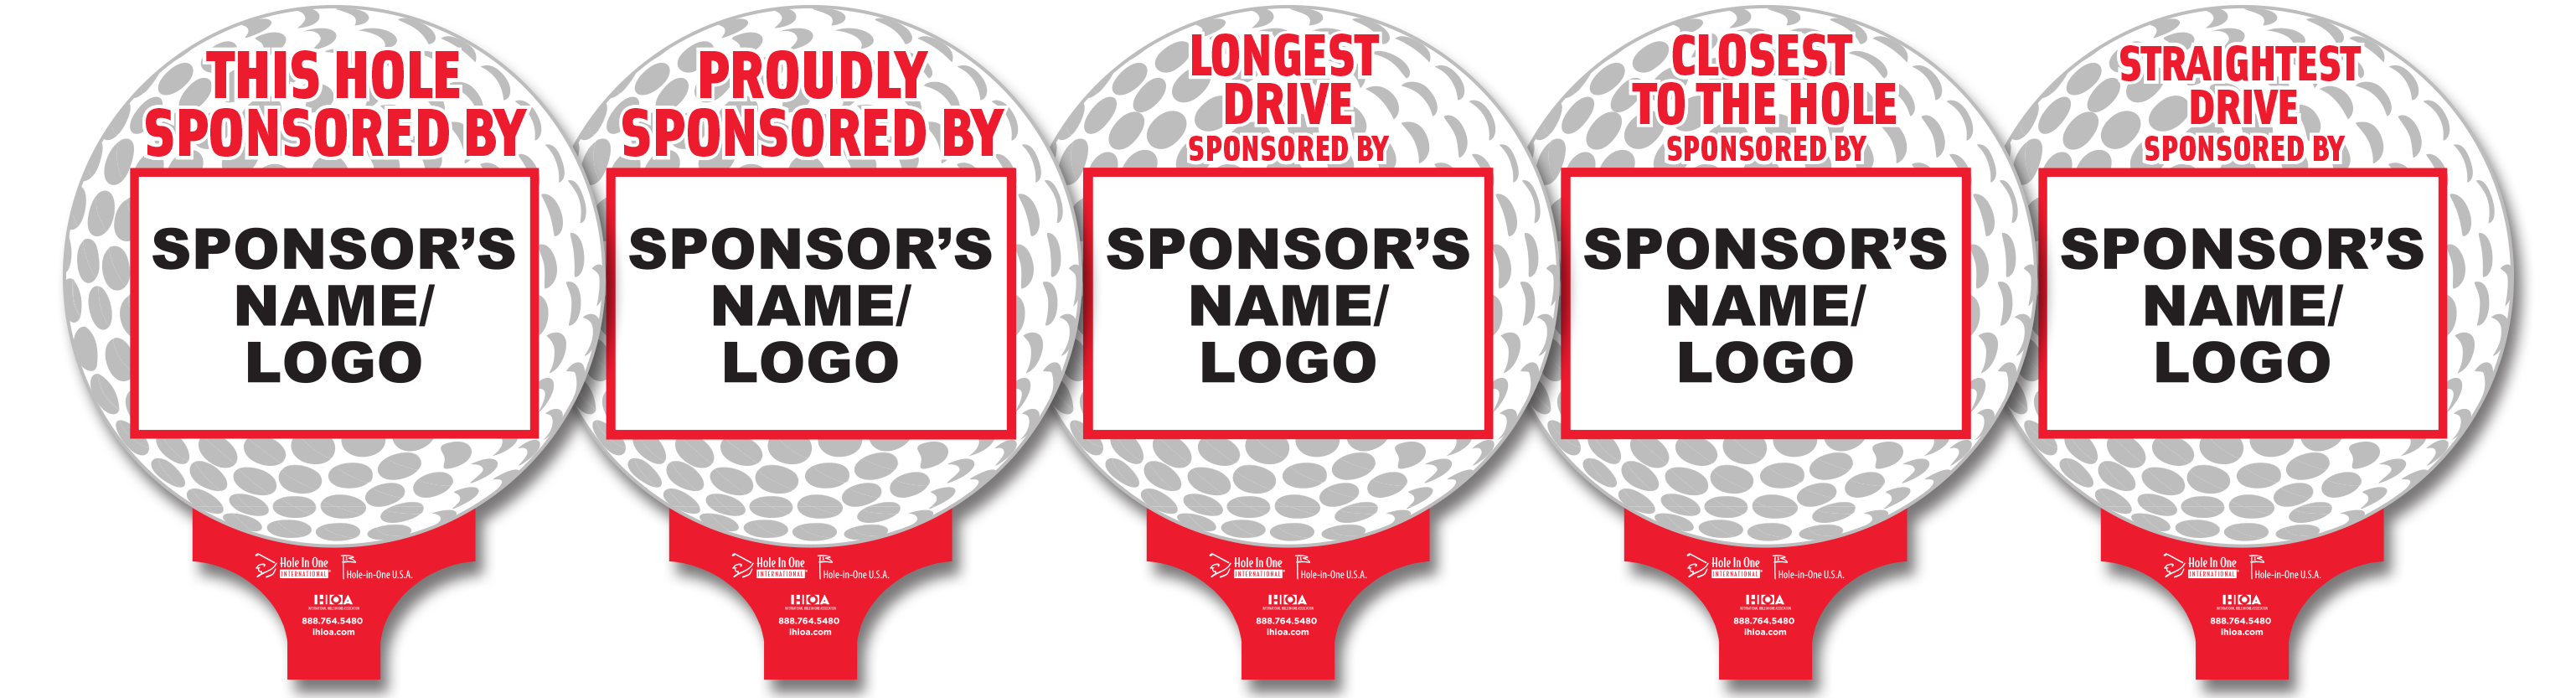 hole in one sponsor signs